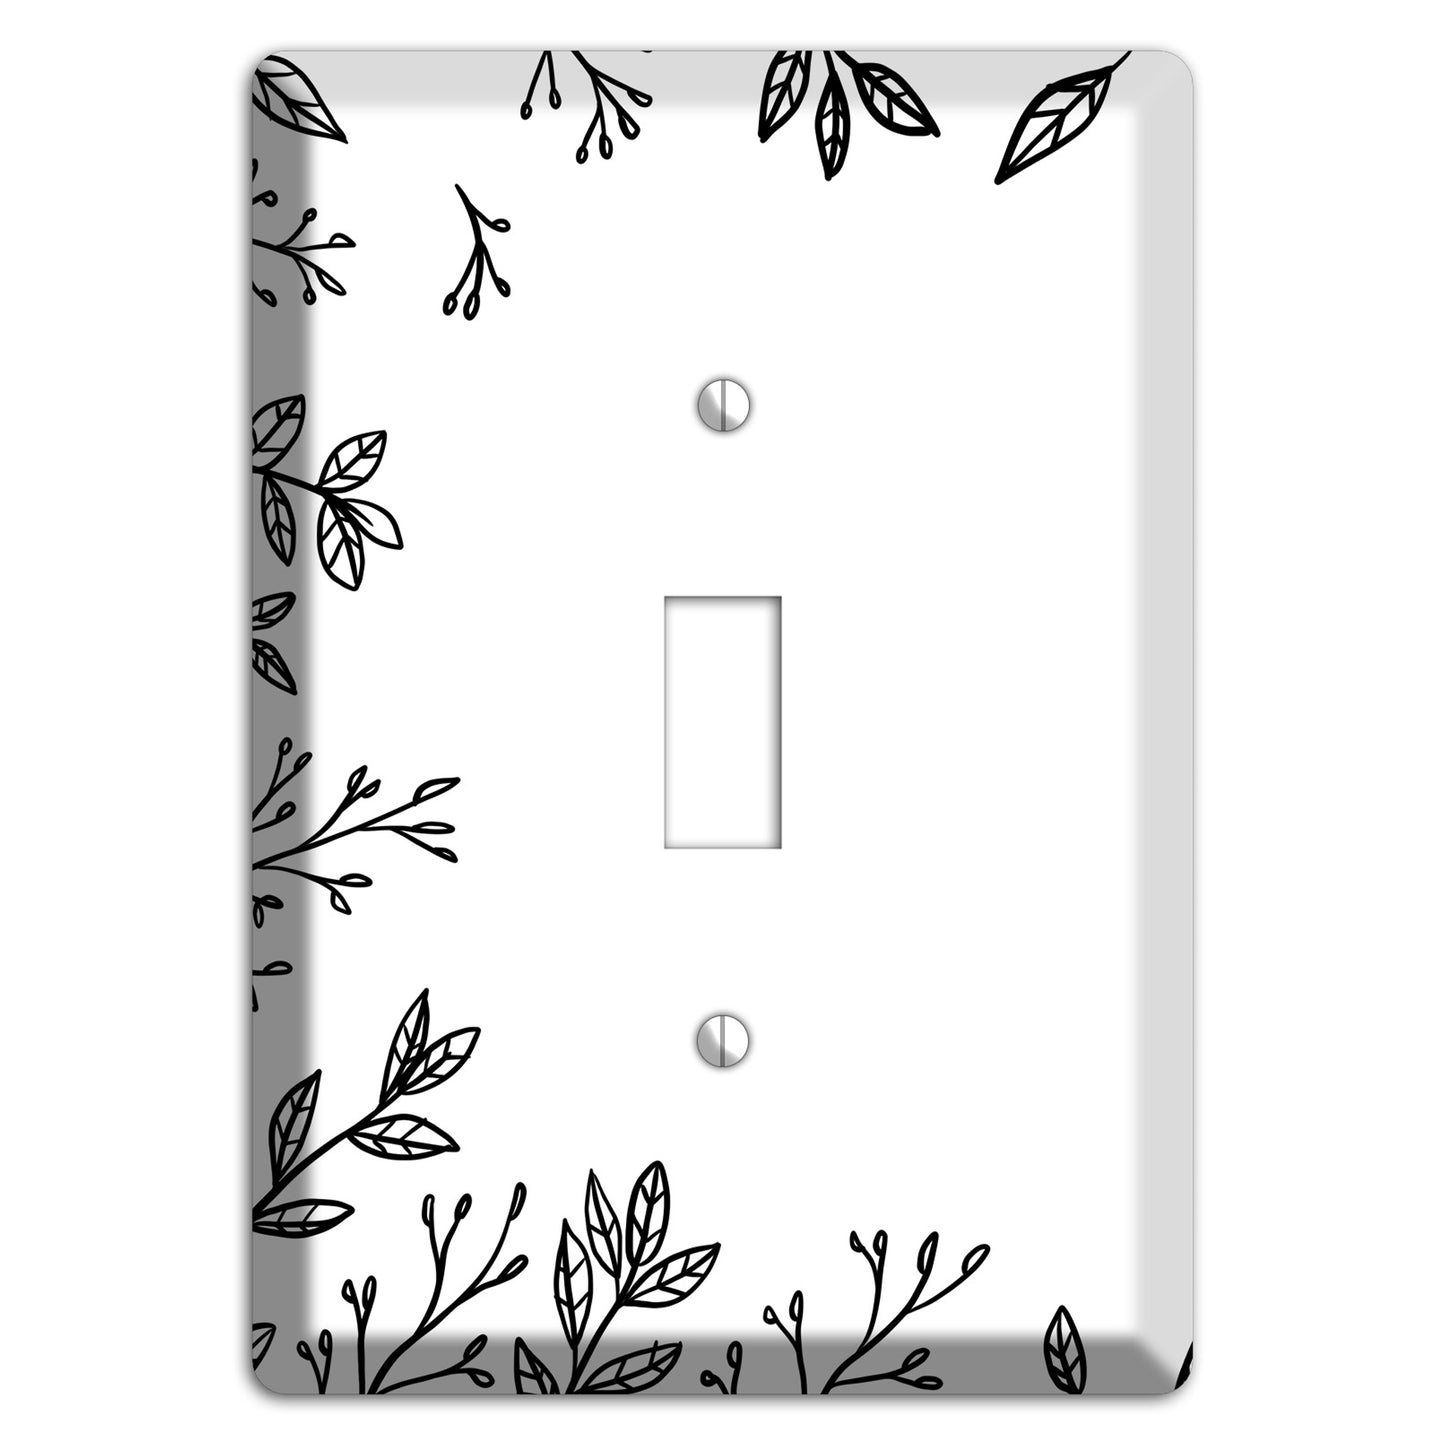 Hand-Drawn Floral 29 Cover Plates